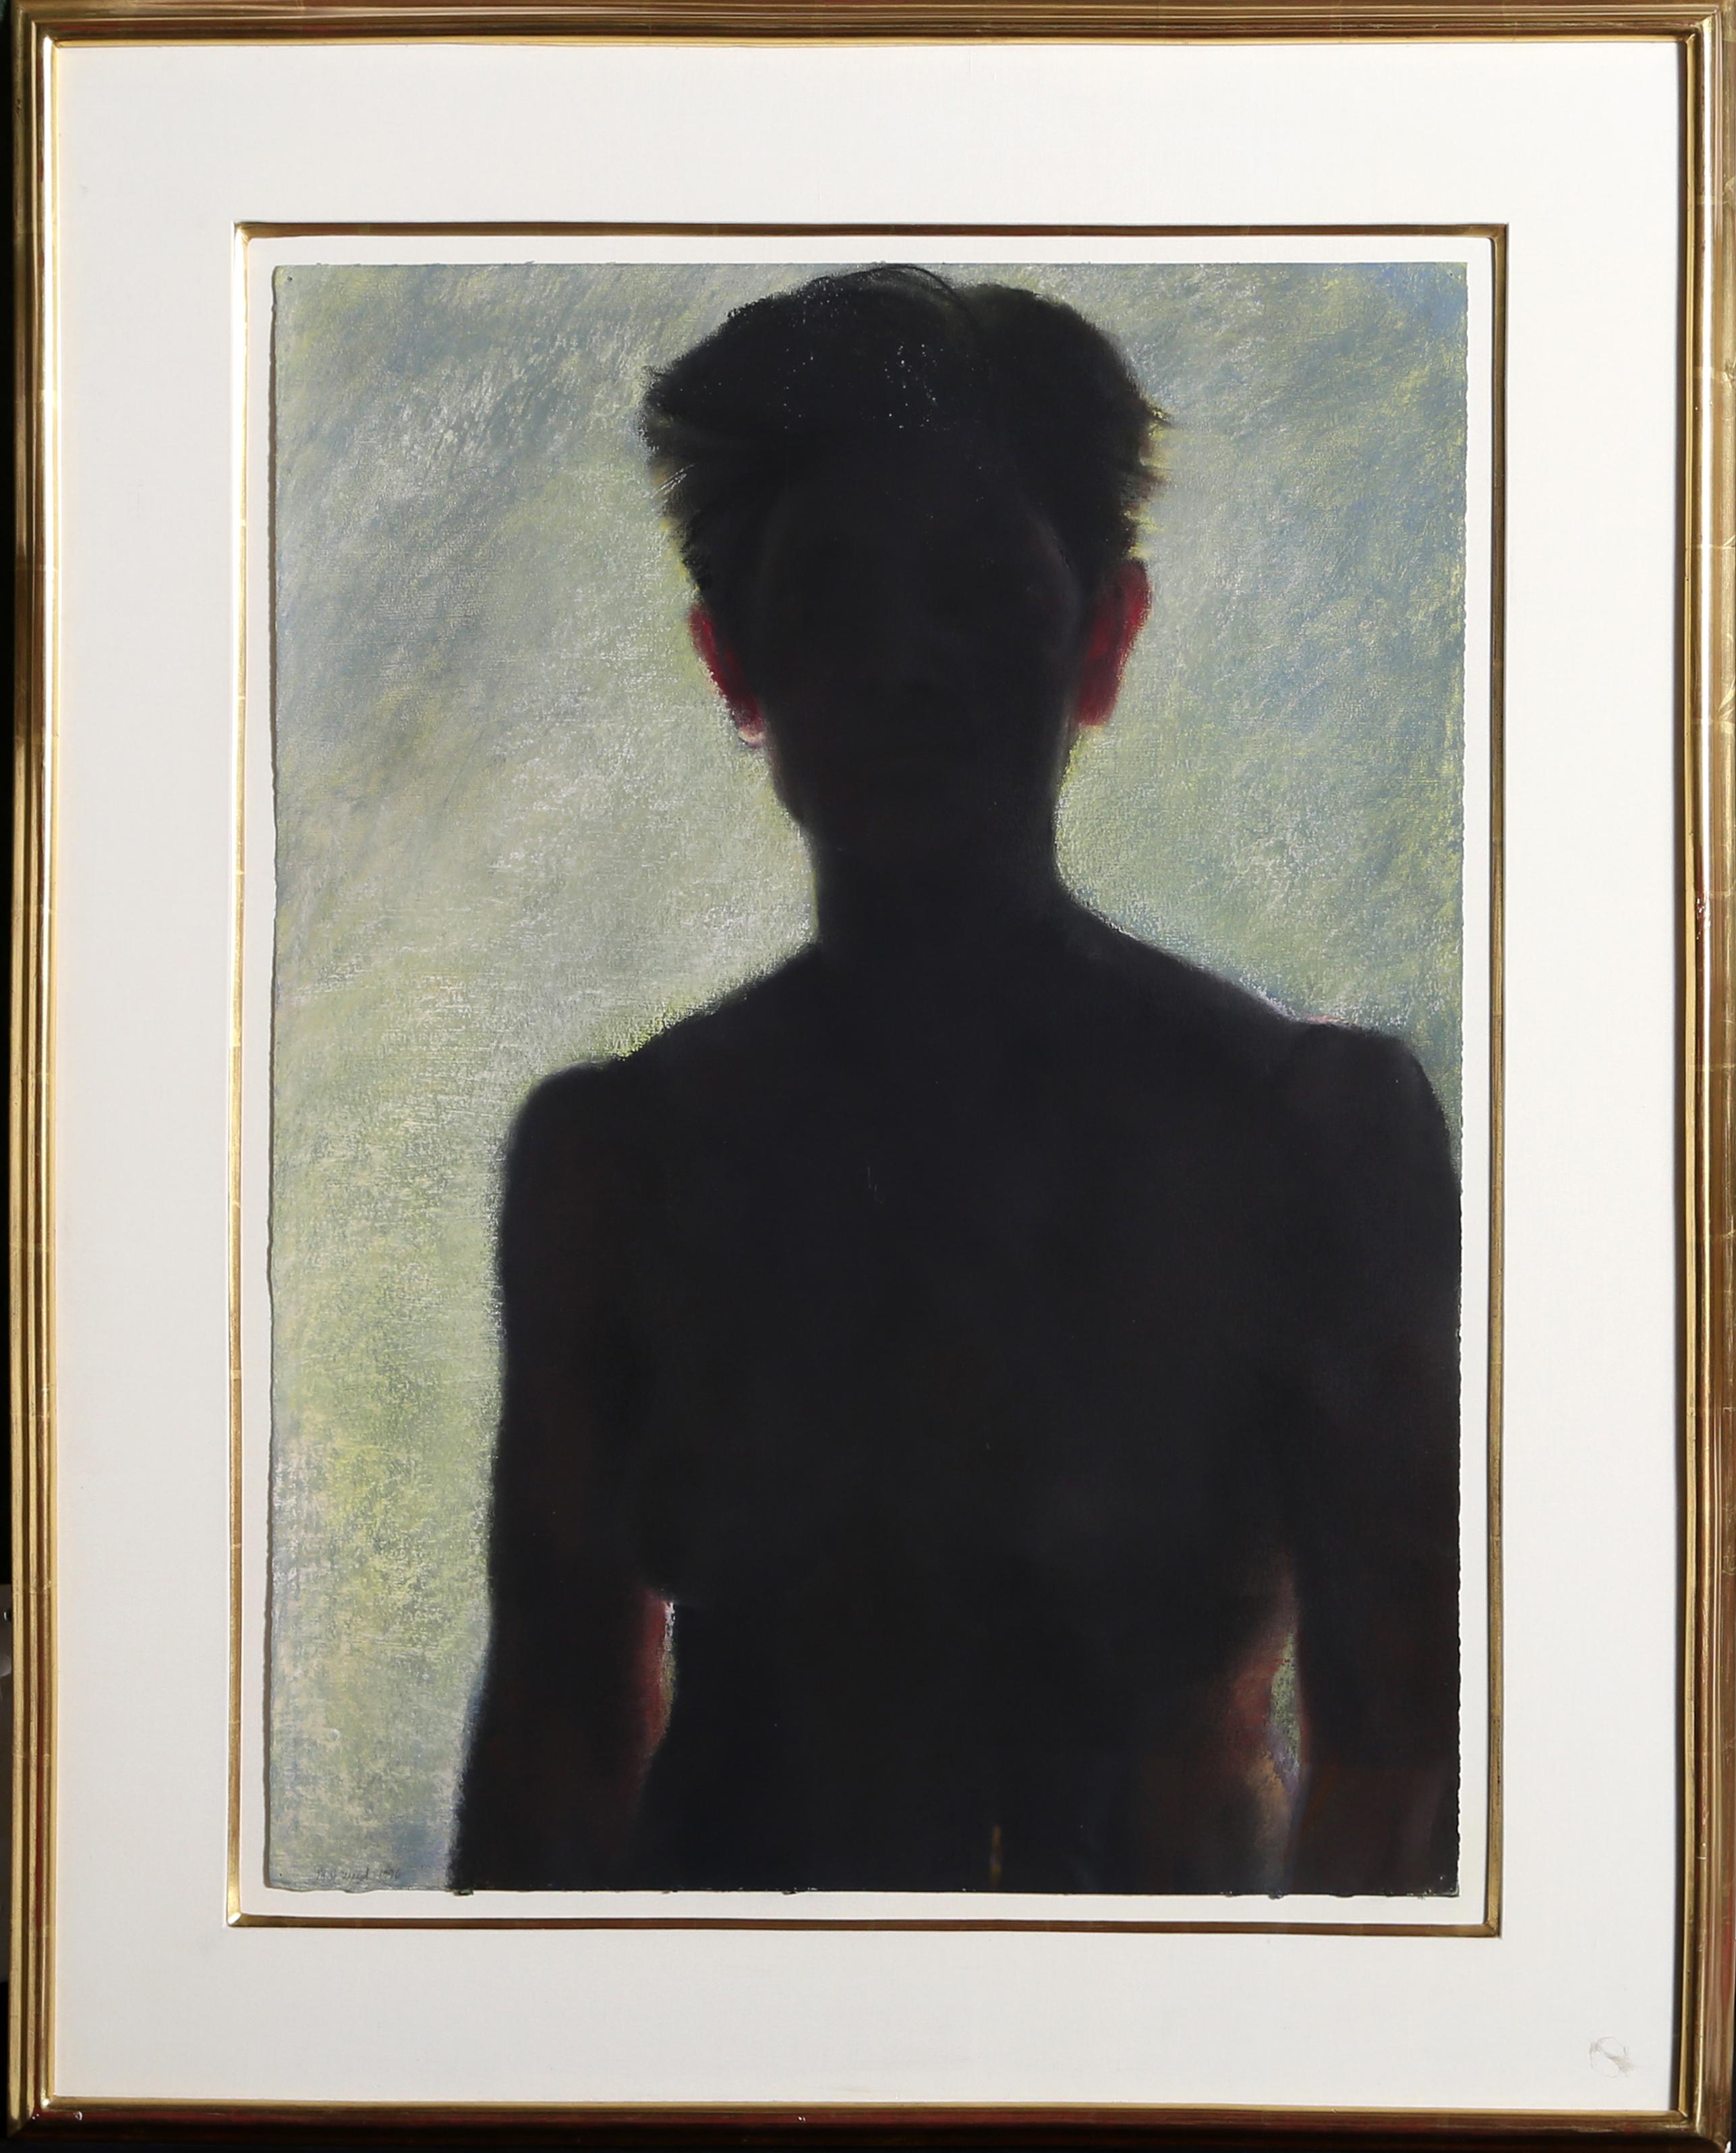 Light, Behind
Mary Joan Waid, American (1939)
Date: 1996
Pastel on Paper, signed
Size: 30 in. x 22 in. (76.2 cm x 55.88 cm)
Frame Size: 40 x 31 inches